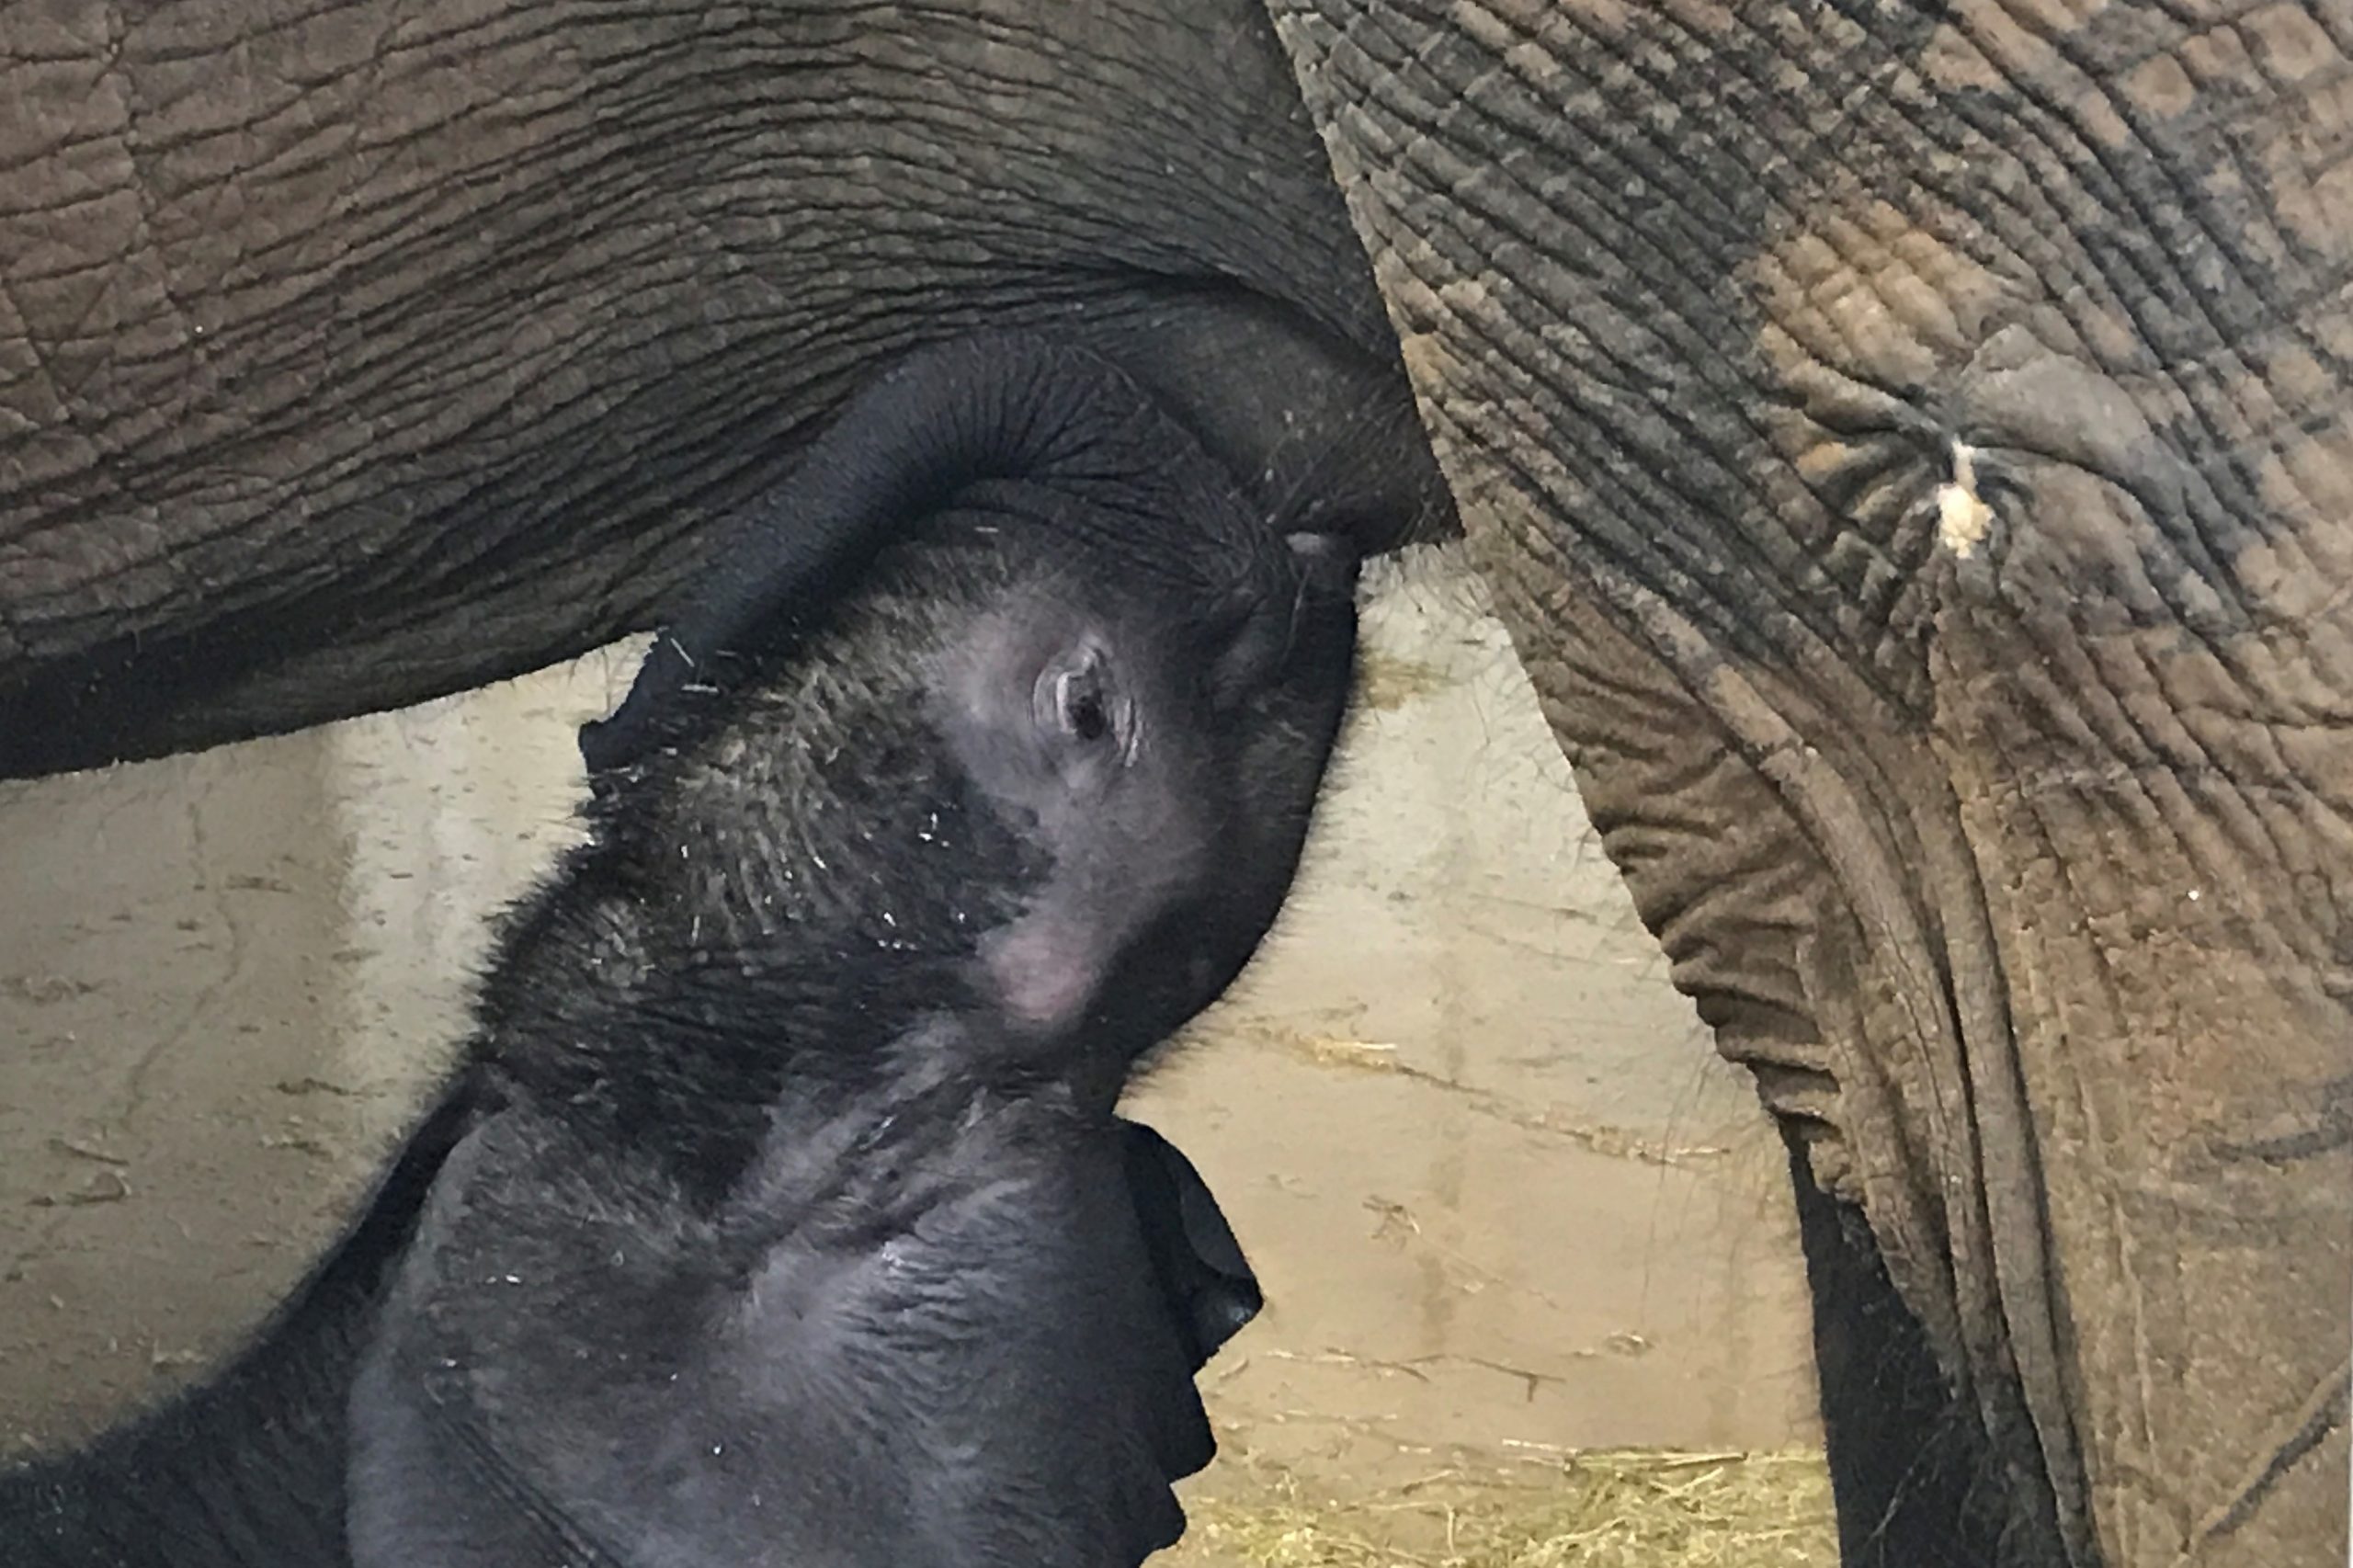 News: Elephant Calf Remains in Guarded Condition